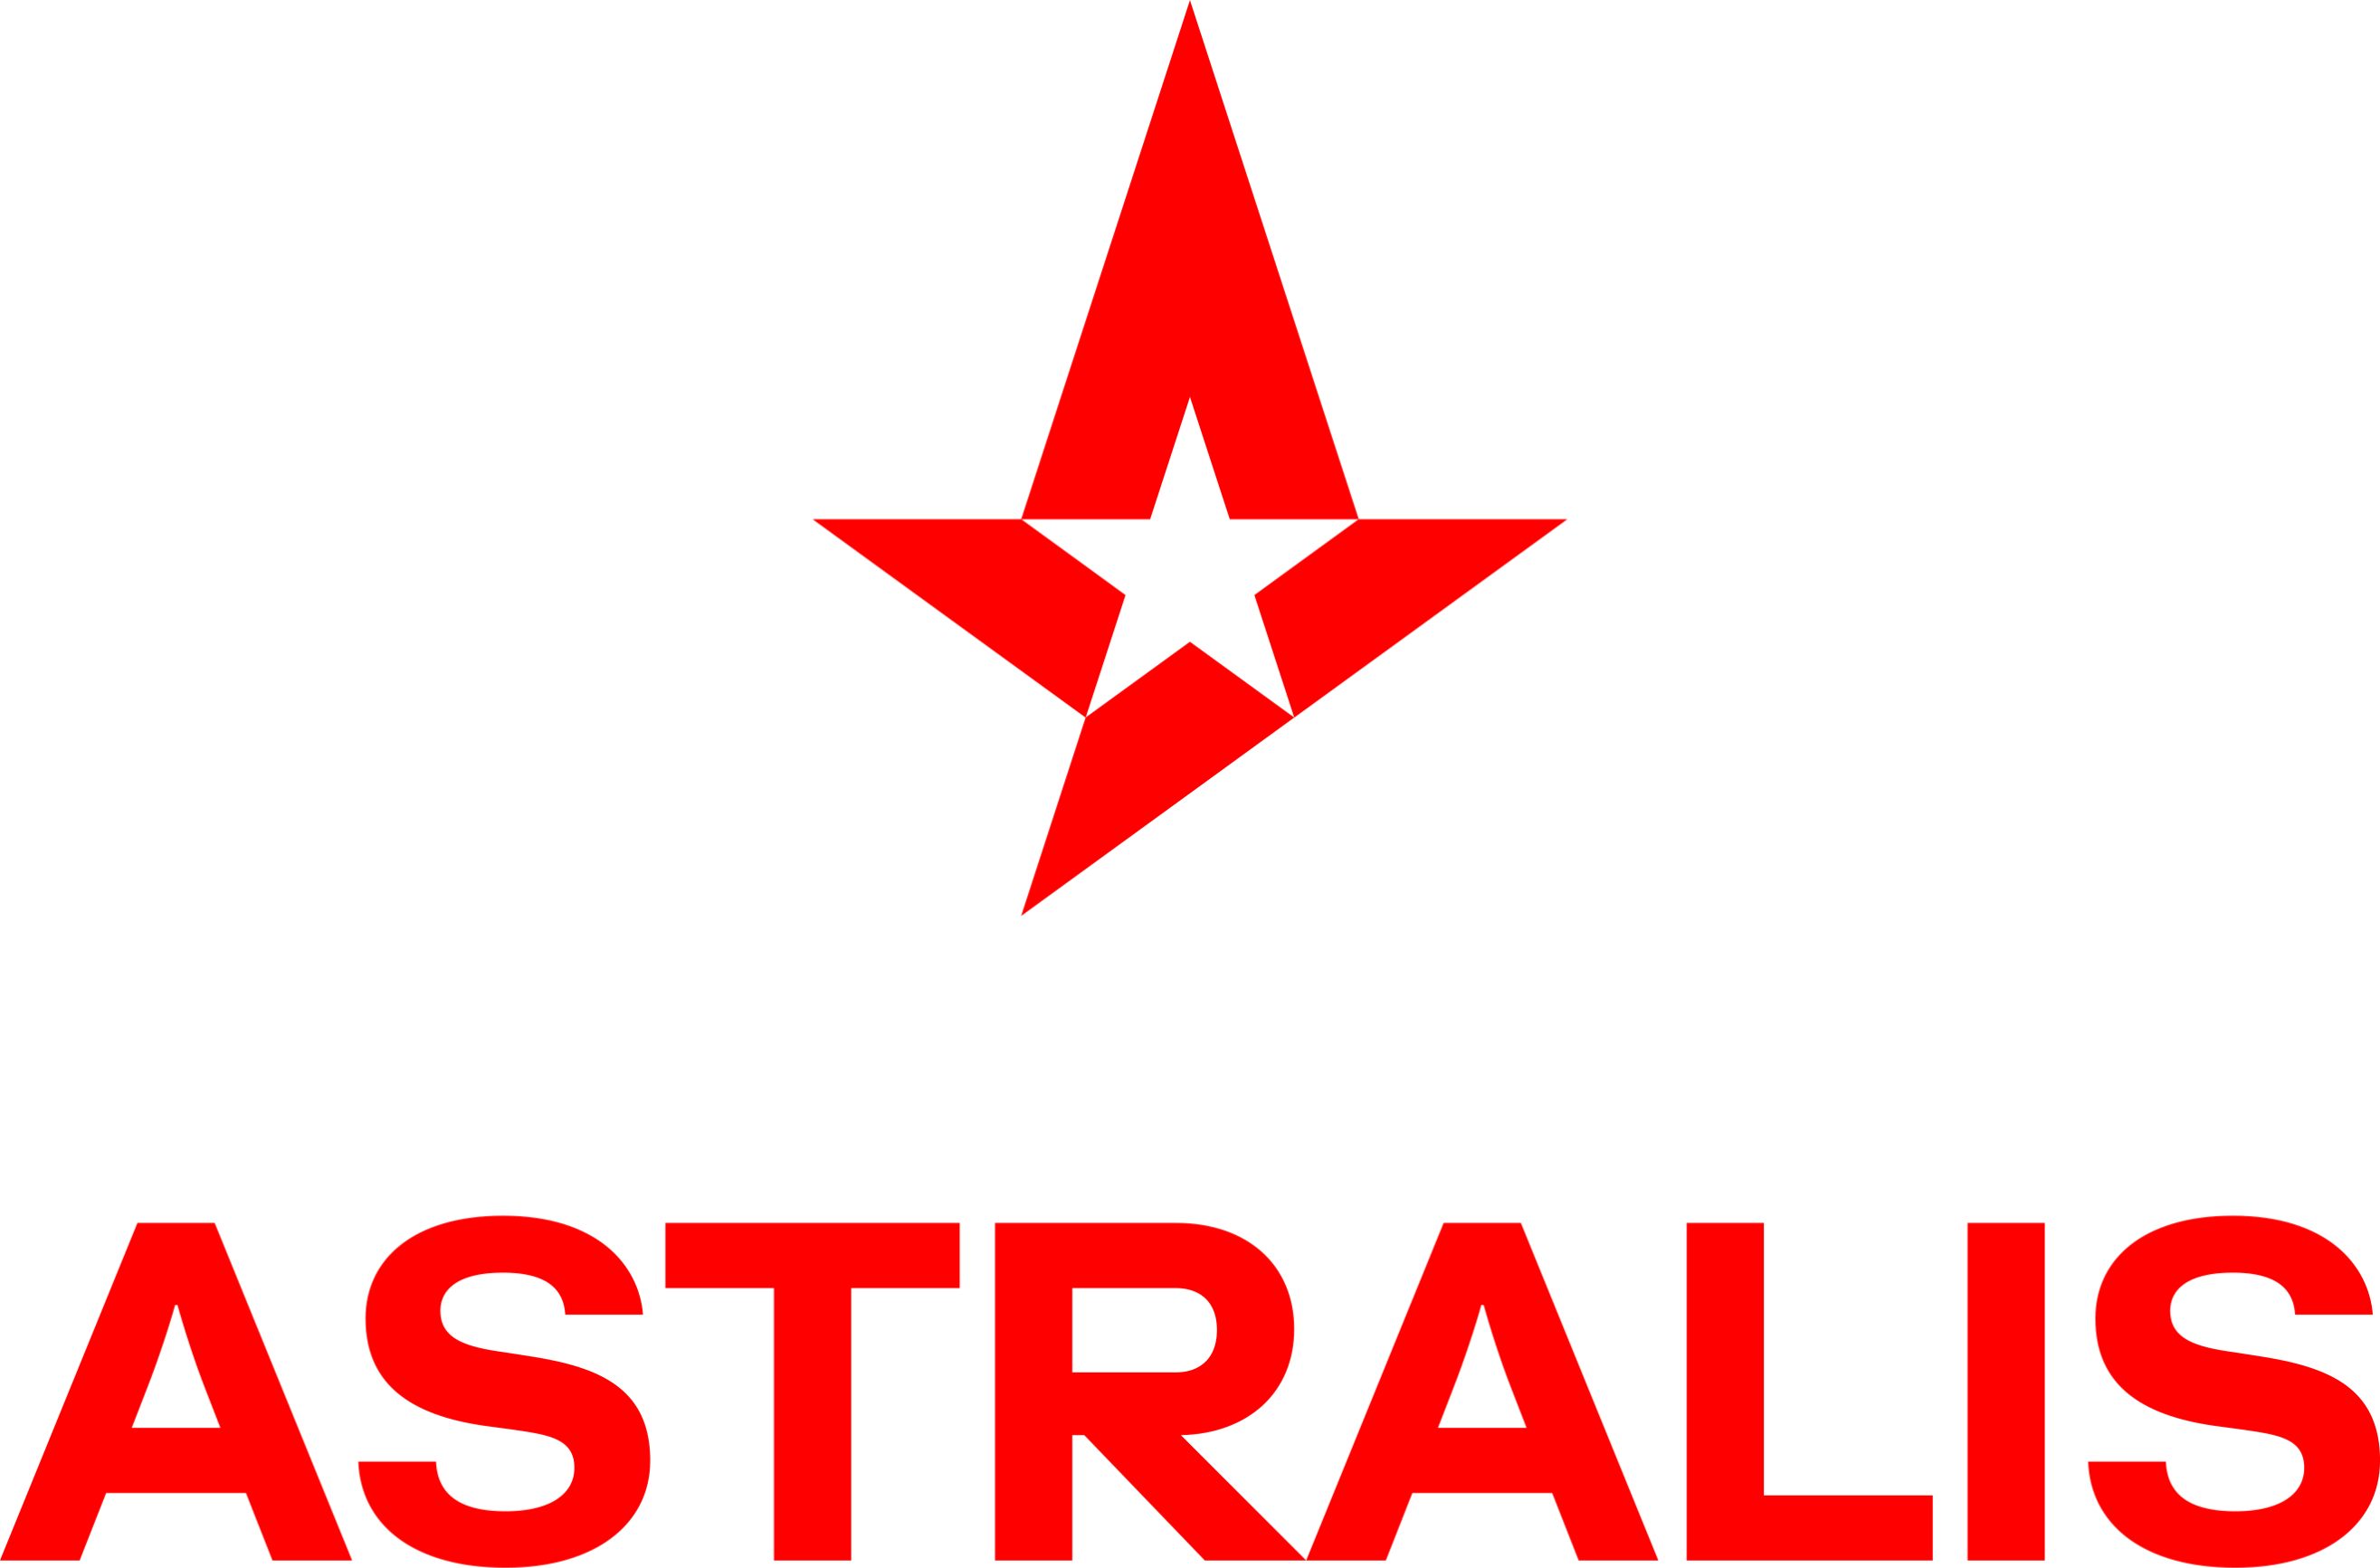 HLTV.org - Member of the current Astralis lineup has